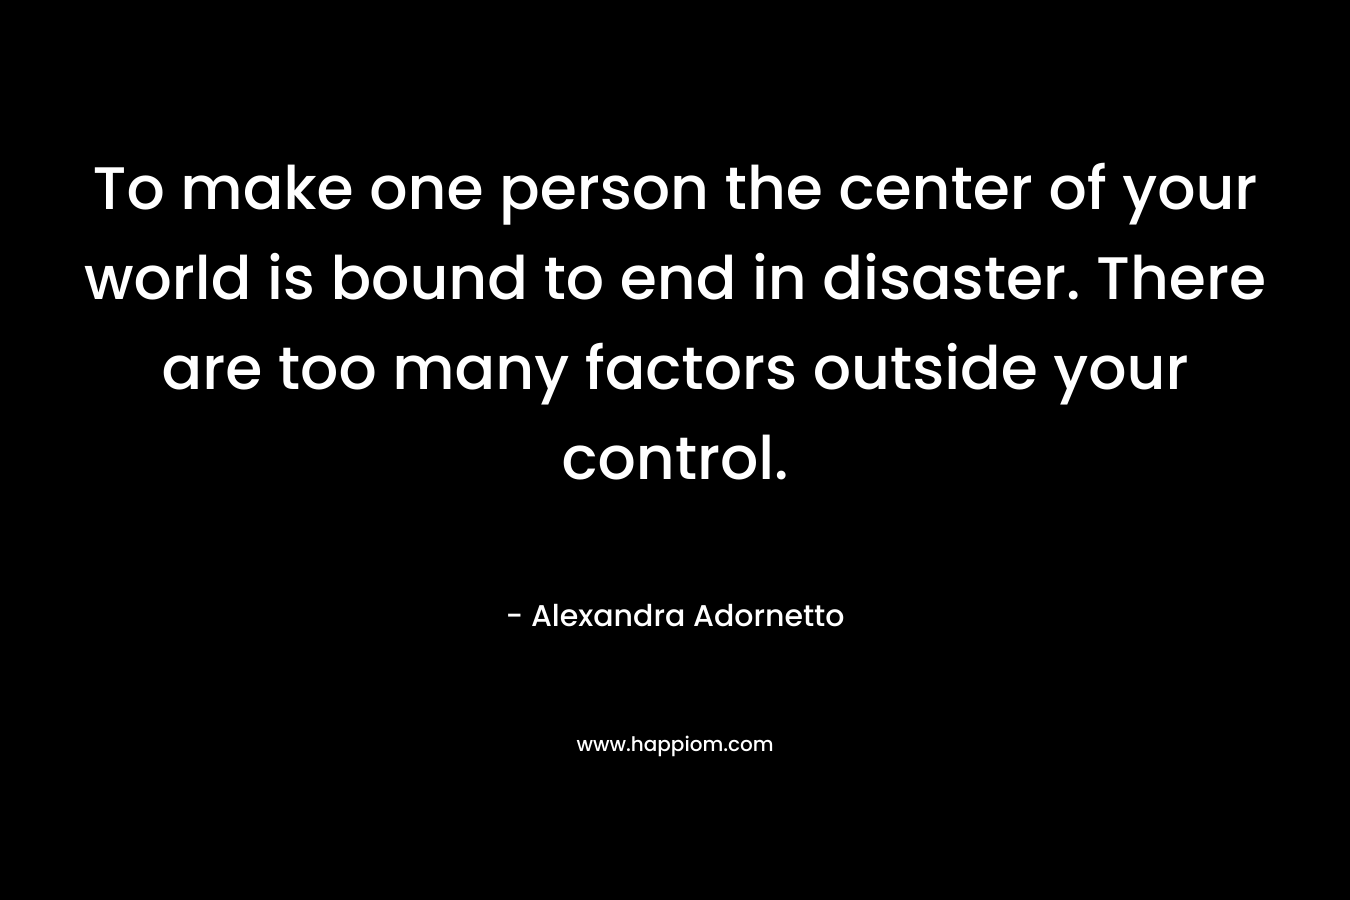 To make one person the center of your world is bound to end in disaster. There are too many factors outside your control. – Alexandra Adornetto